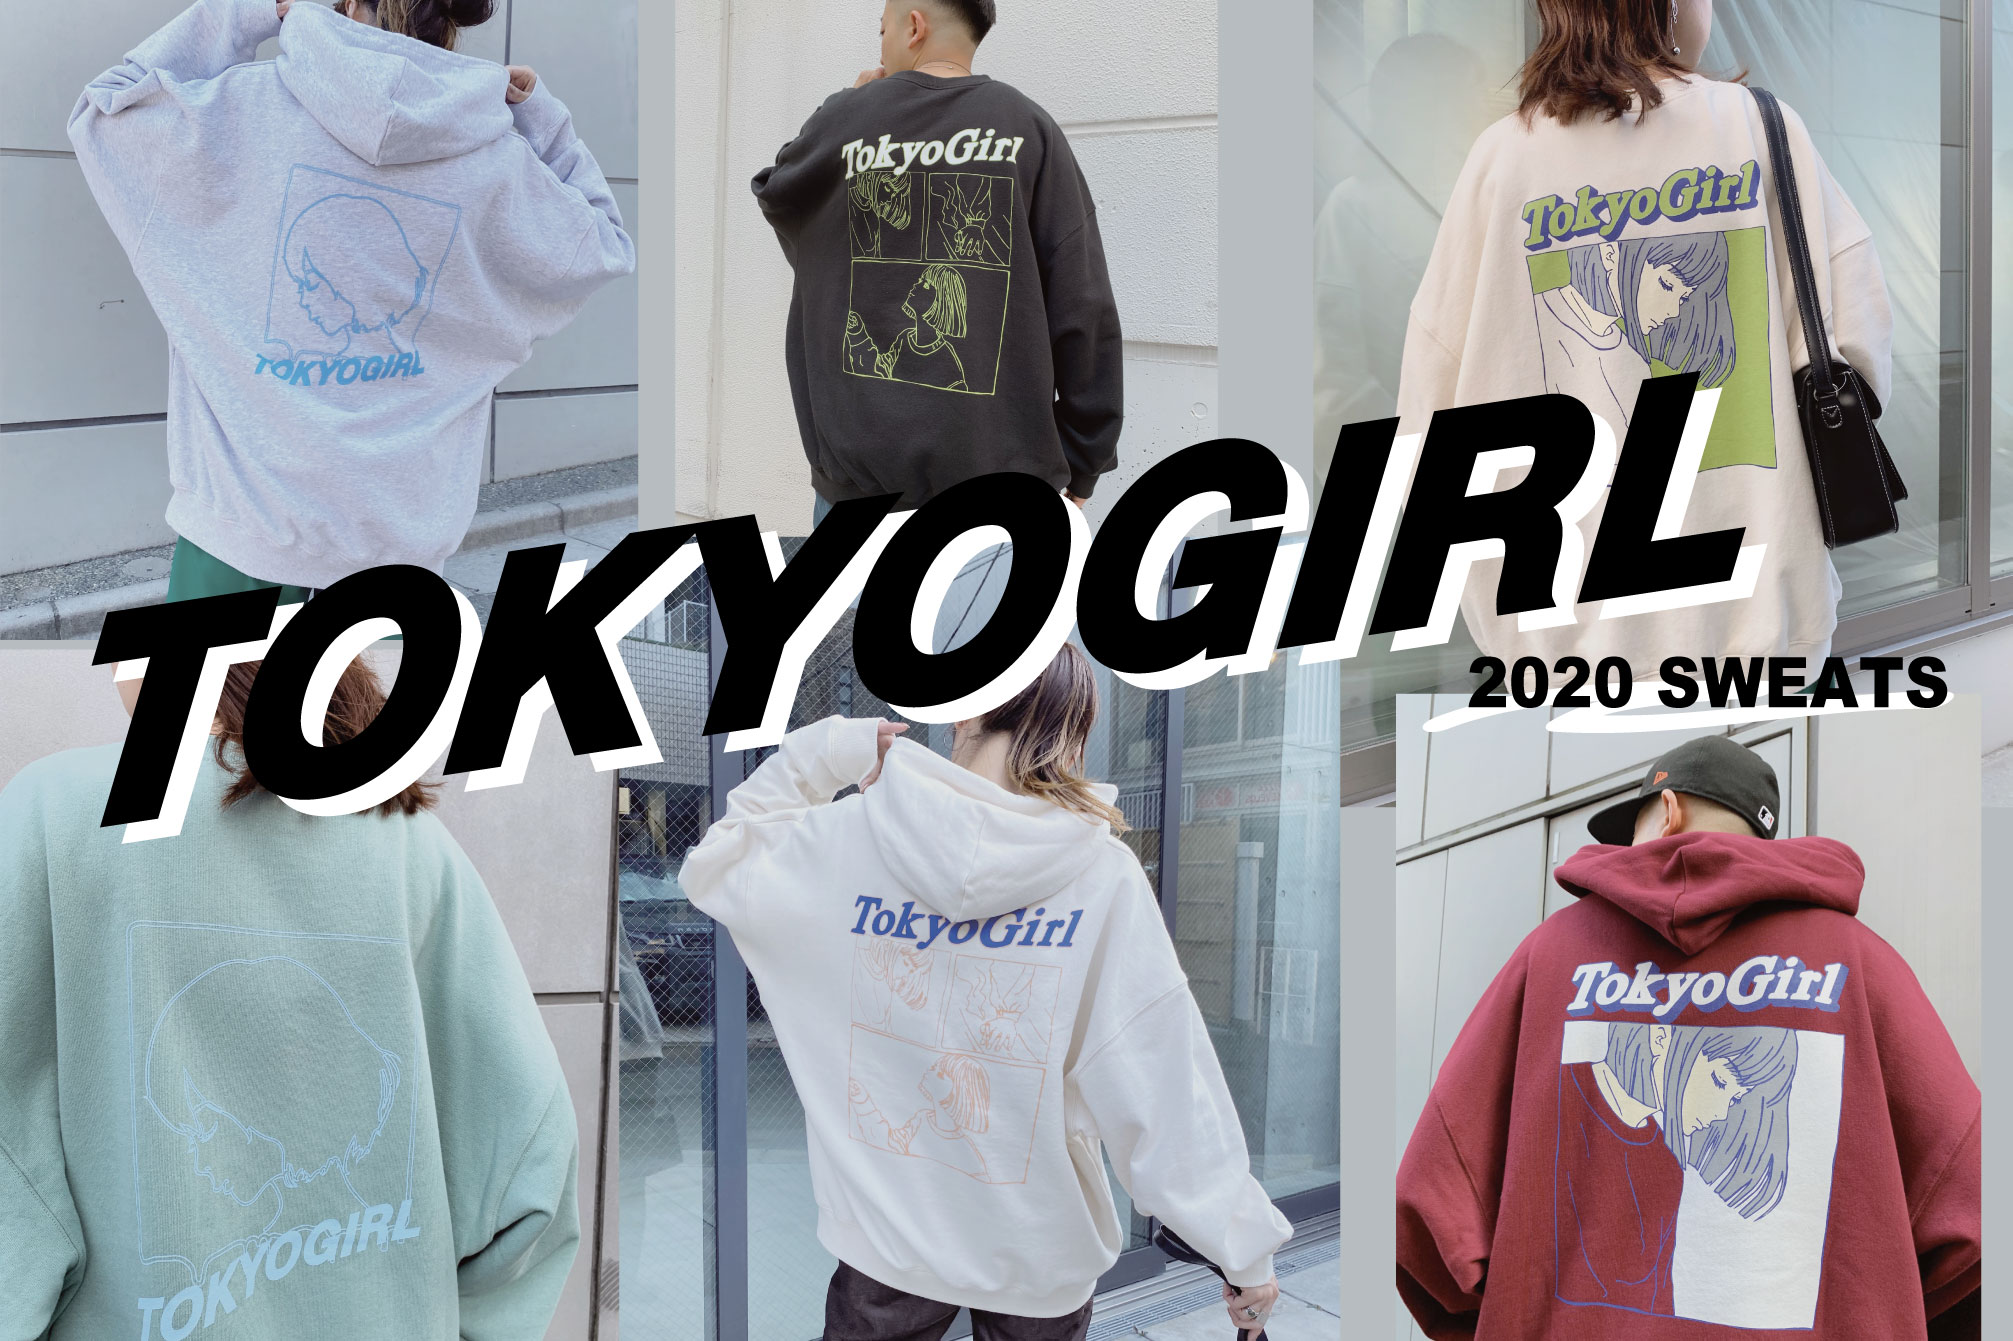 TOKYO GIRL SWEATS 2020】 | WHO'S WHO gallery(フーズフーギャラリー 